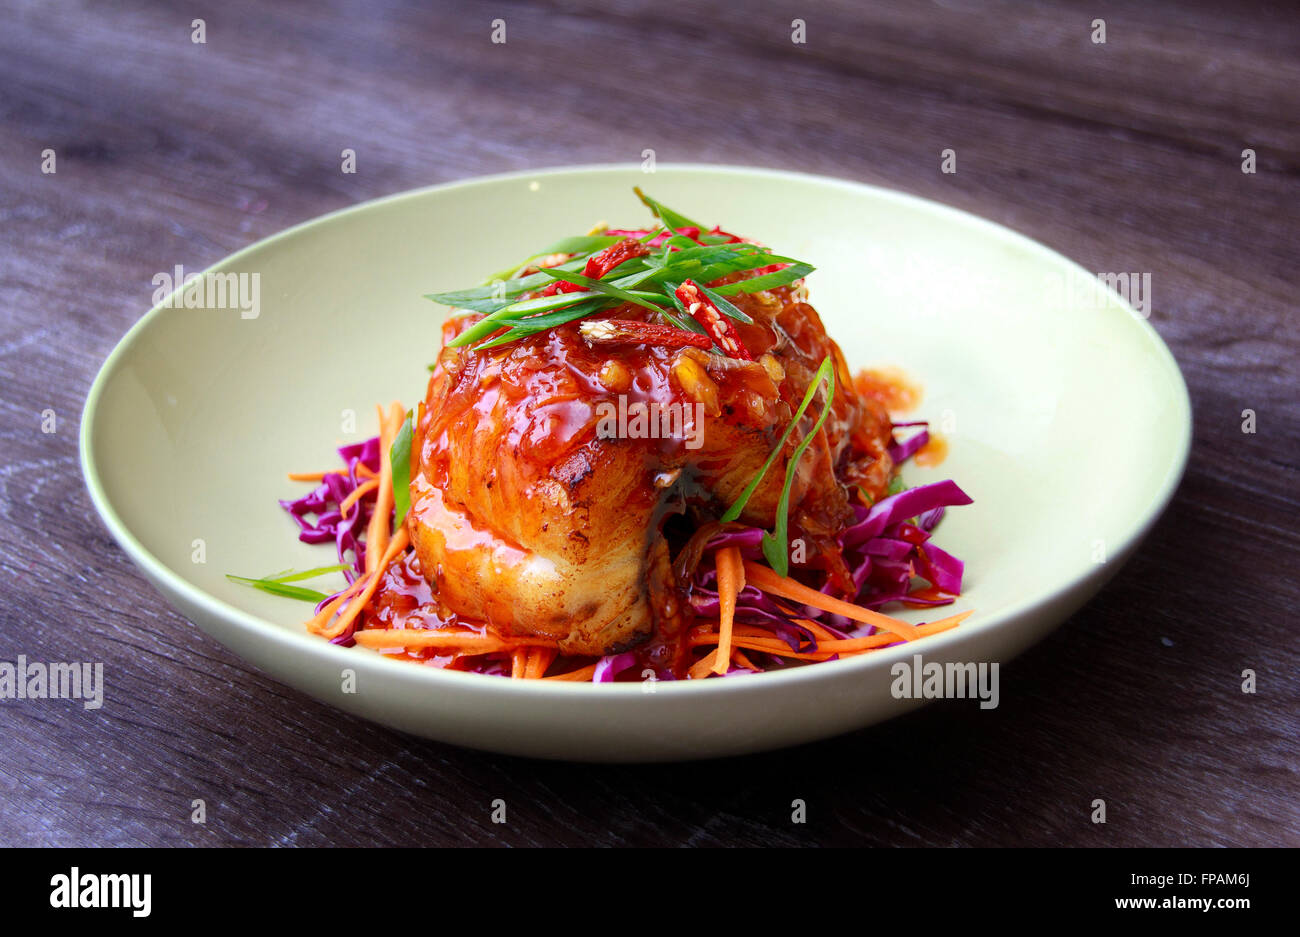 Fried fish with hot chili sauce Stock Photo